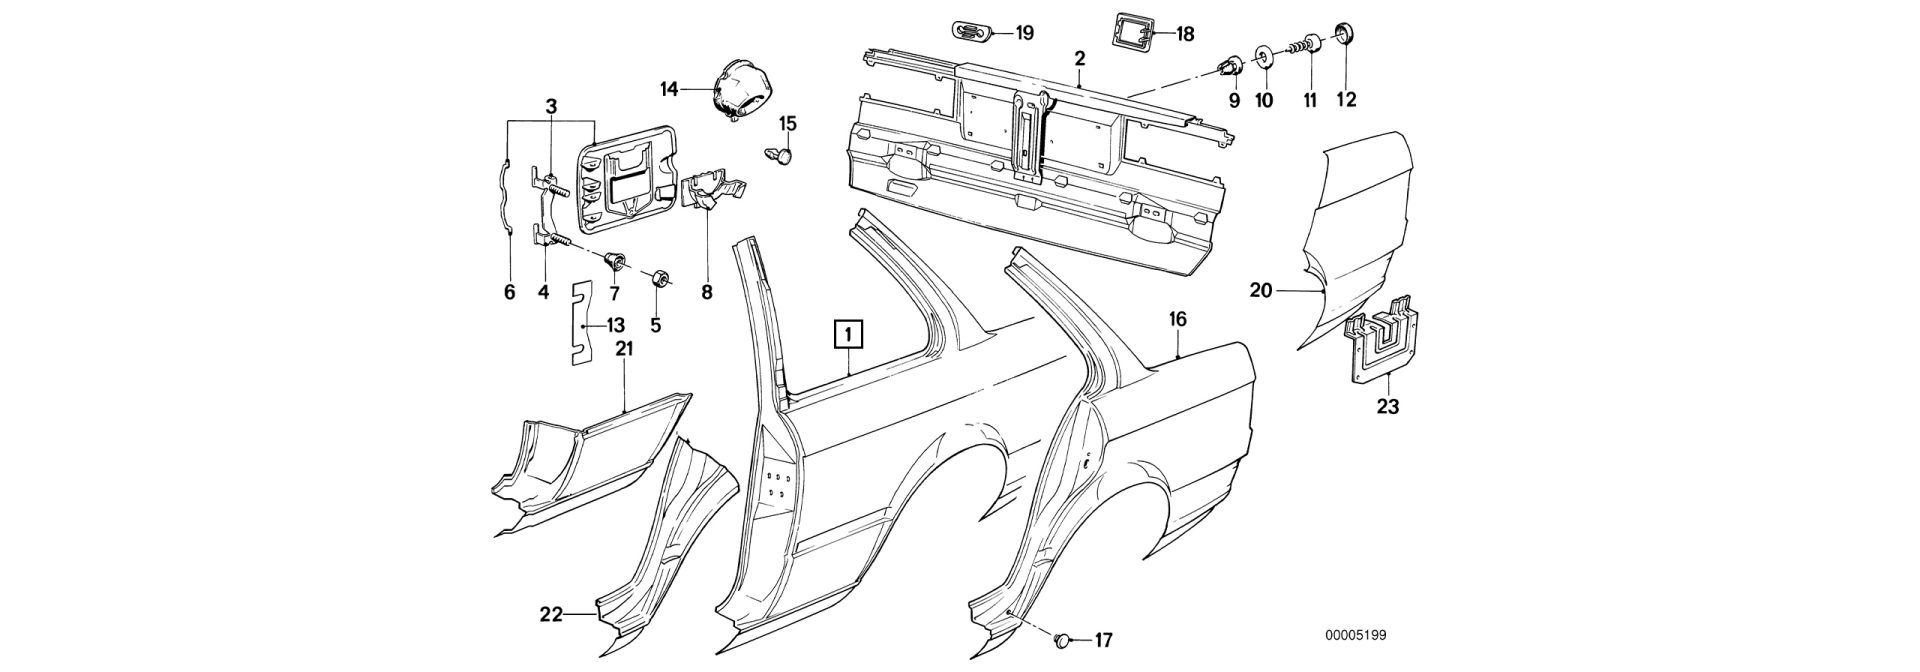 Rear side panel exploded-view drawing